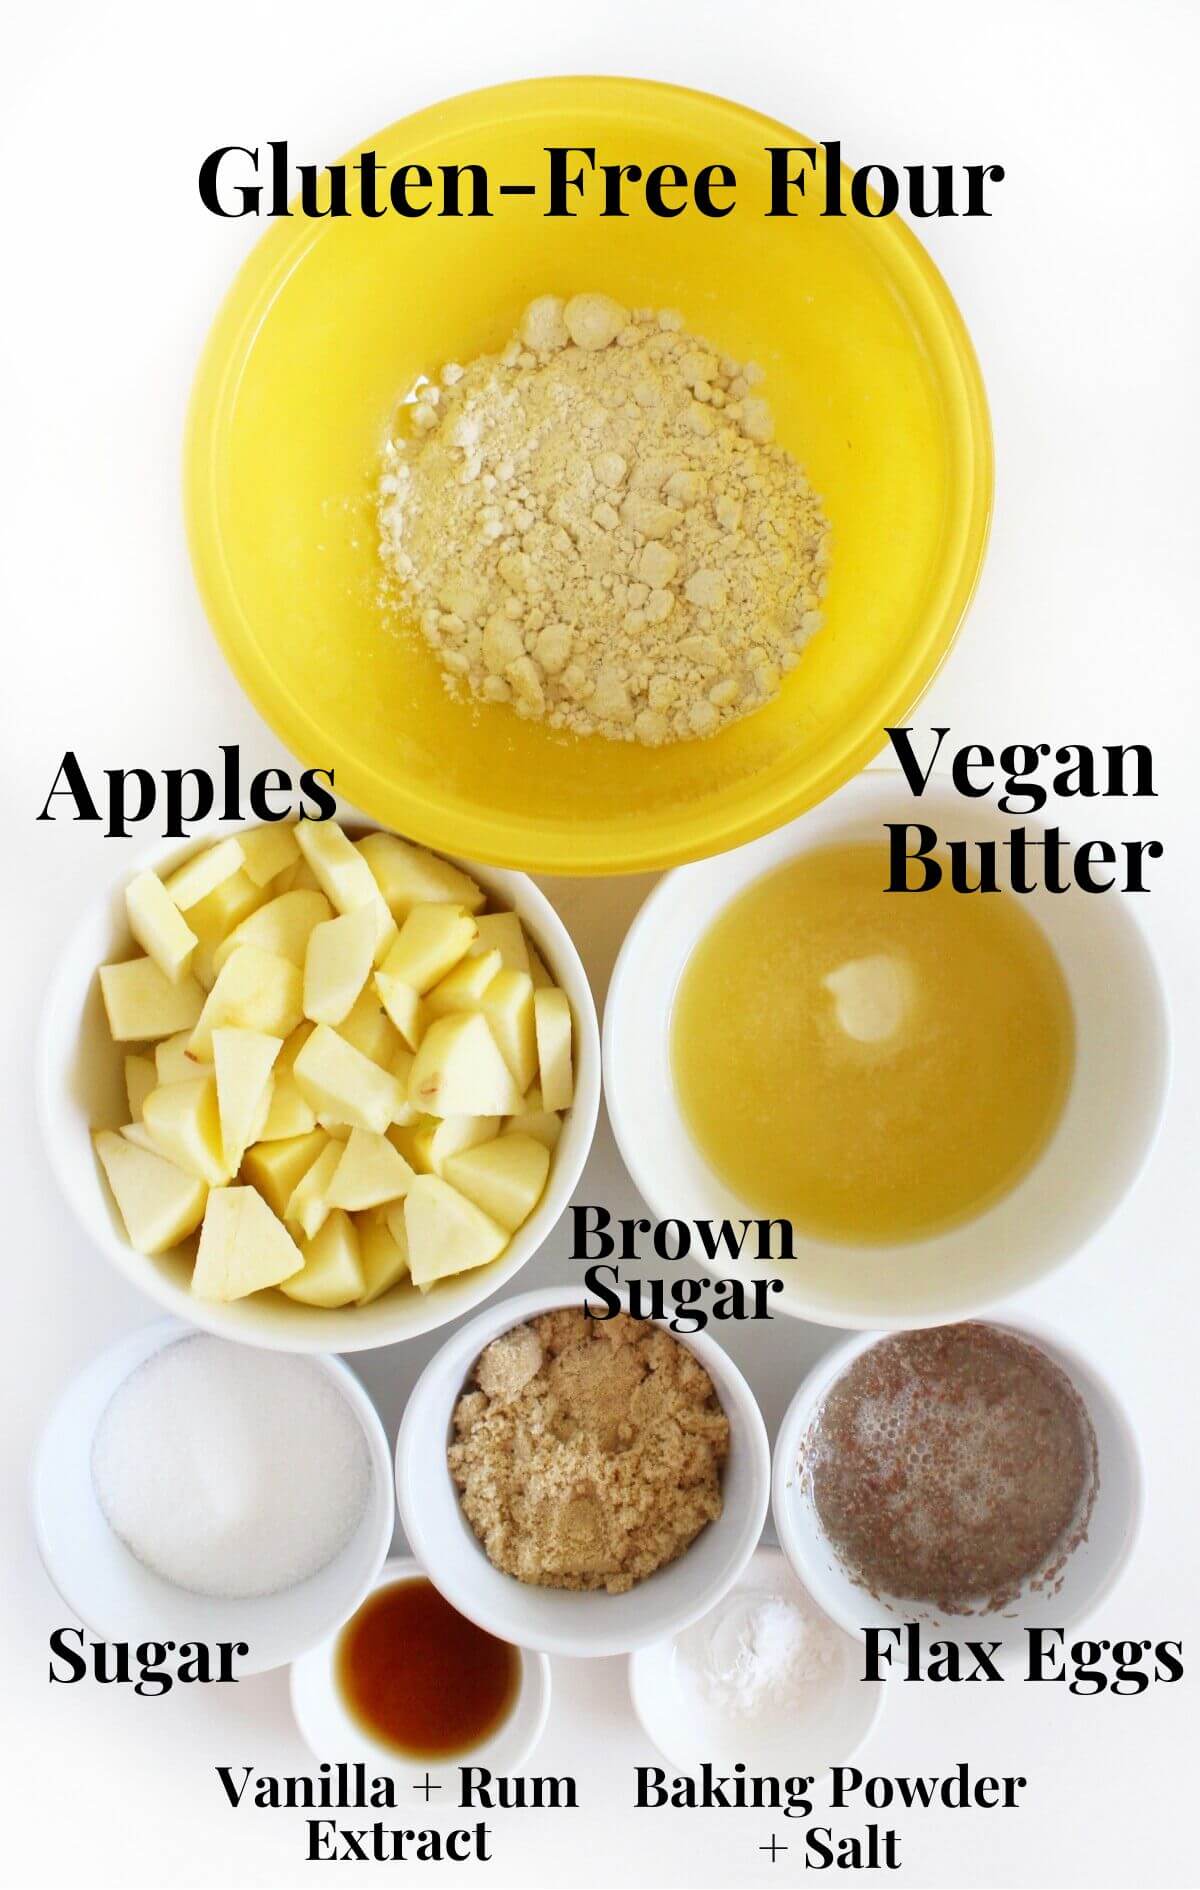 ingredients for gluten-free and vegan french apple cake